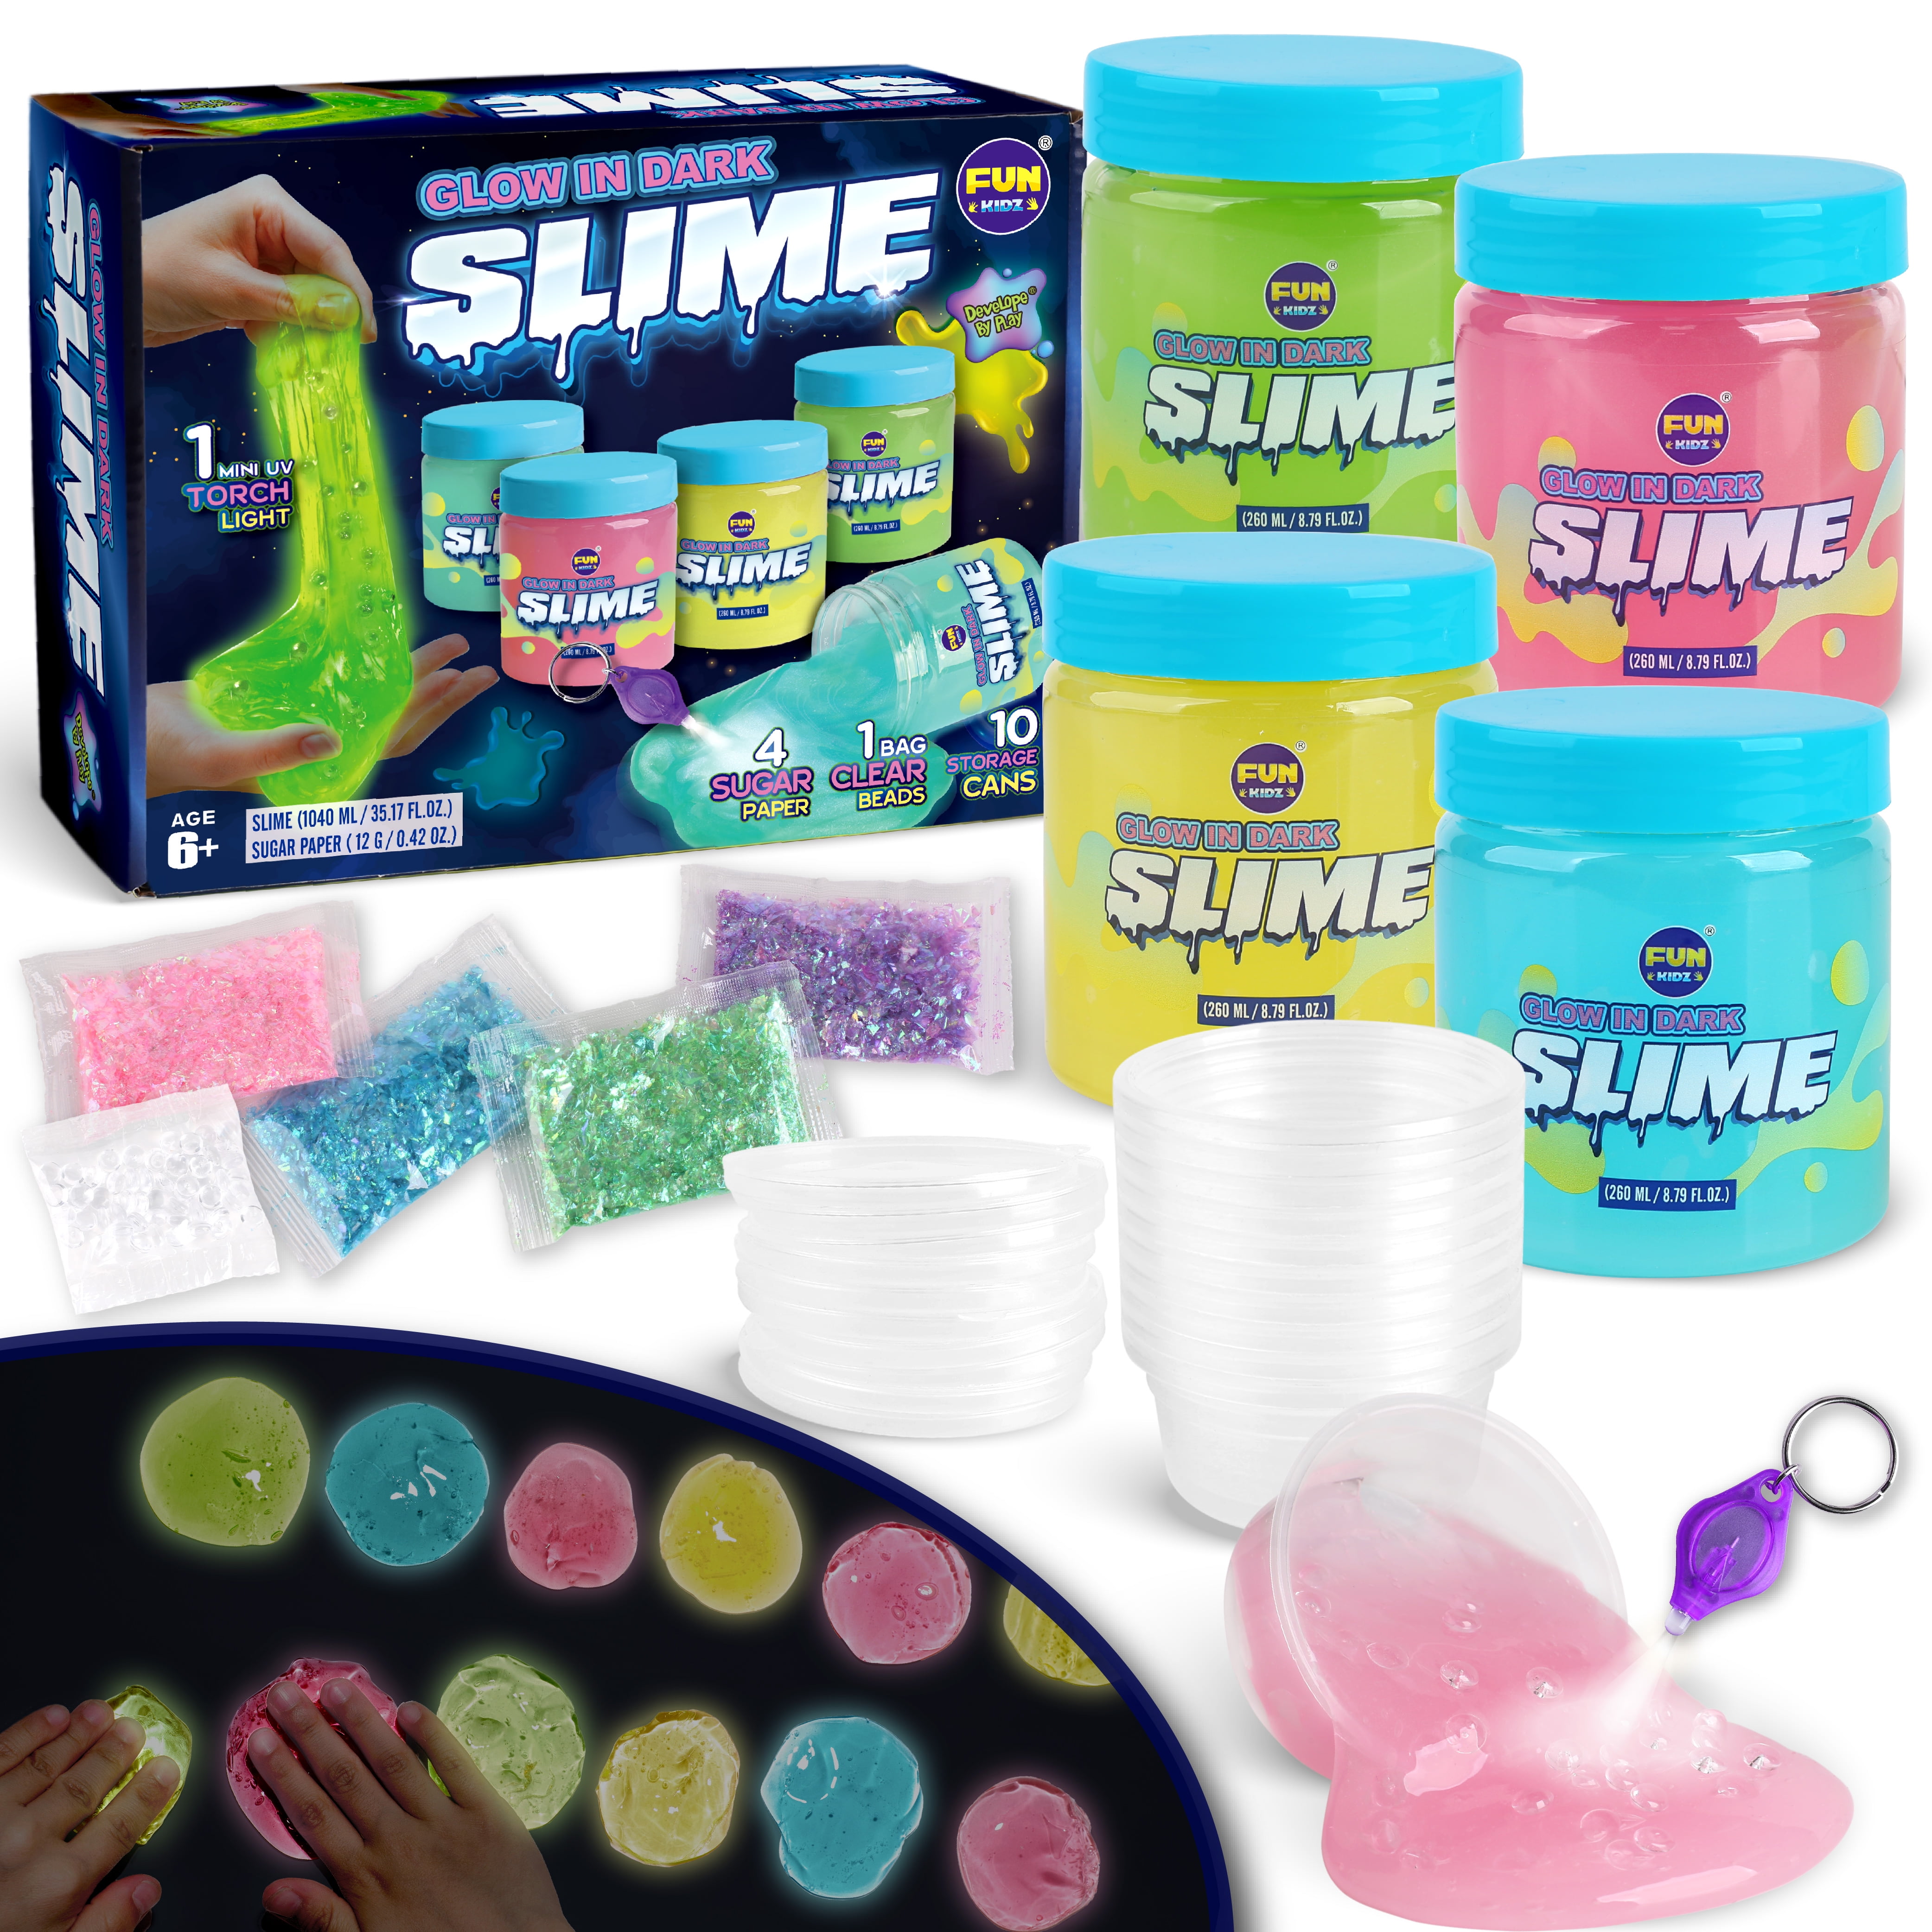 Glow in the Dark Slime Toys, Funkidz Slime Kit for Girls Boys Kids 4 Big  Count Neon Glowing Colors Slime with Fish Beads Flash Sugar Paper Supplies  for Party Favors 